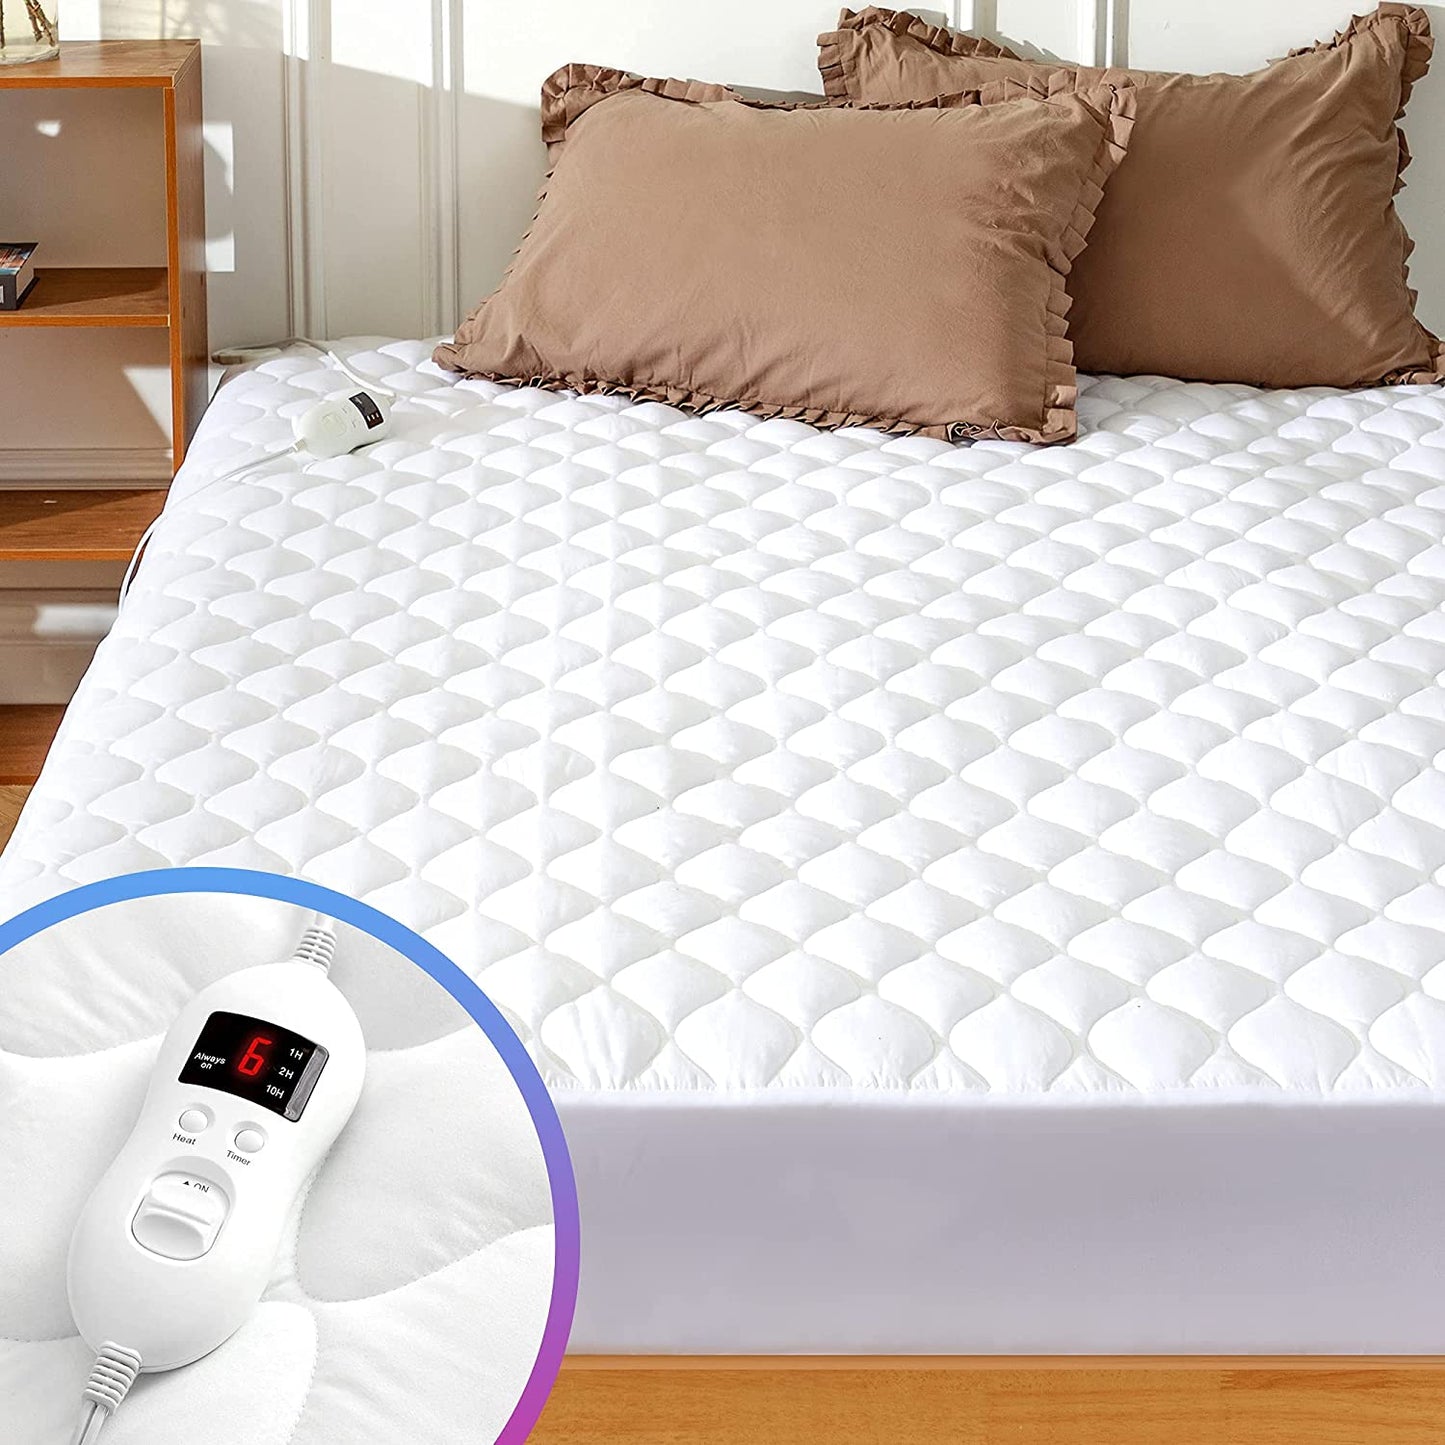 MAKATZ Heated Mattress Pad California King Size Adjustable Zone Heating with 8 Heat Settings Controller Quilted Electric Mattress Pad Fit up to 21 Inch